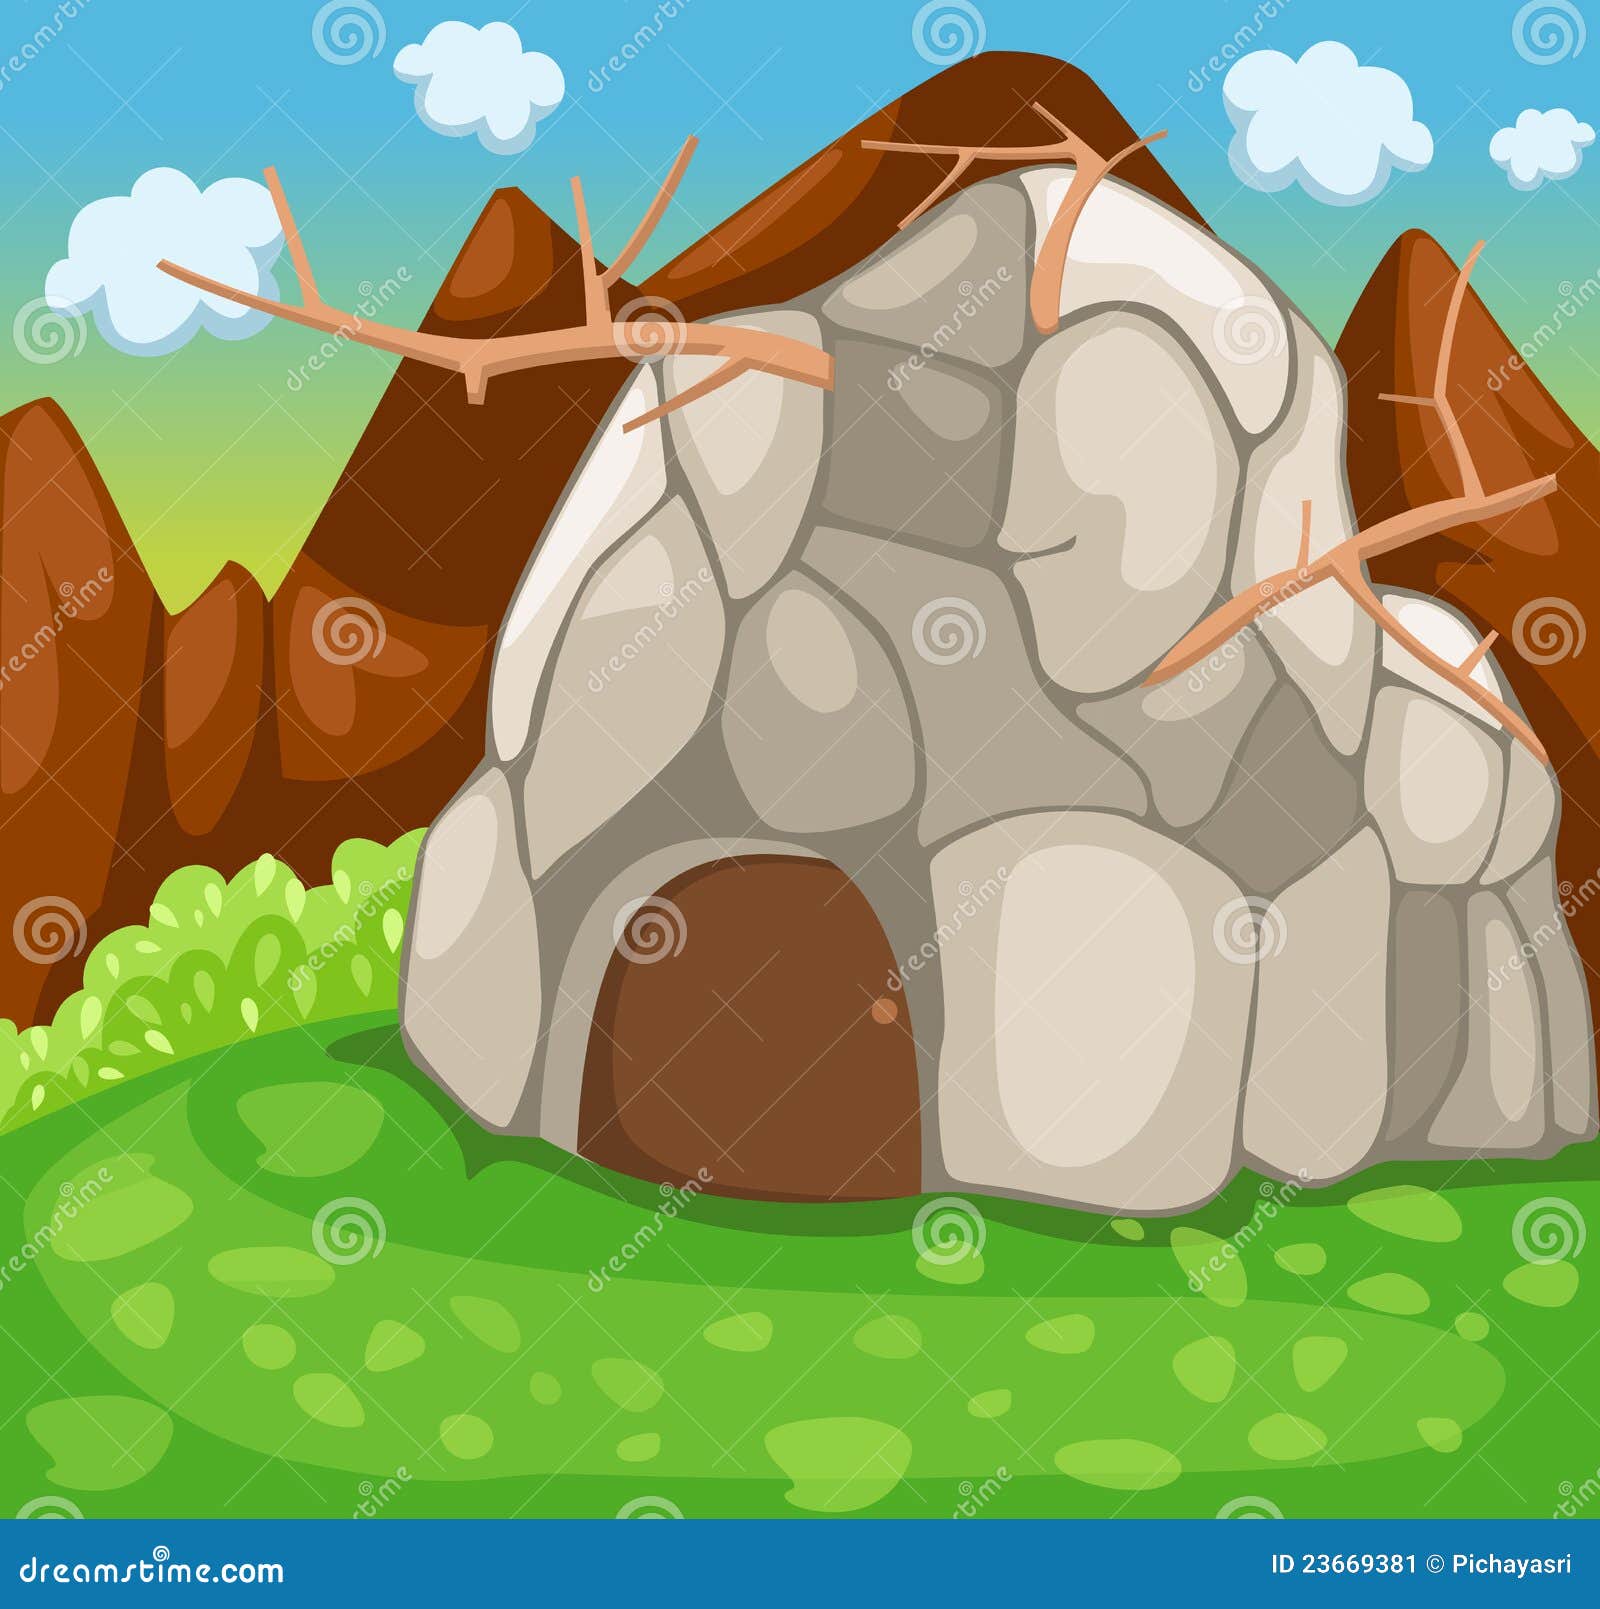 clipart house on rock - photo #13